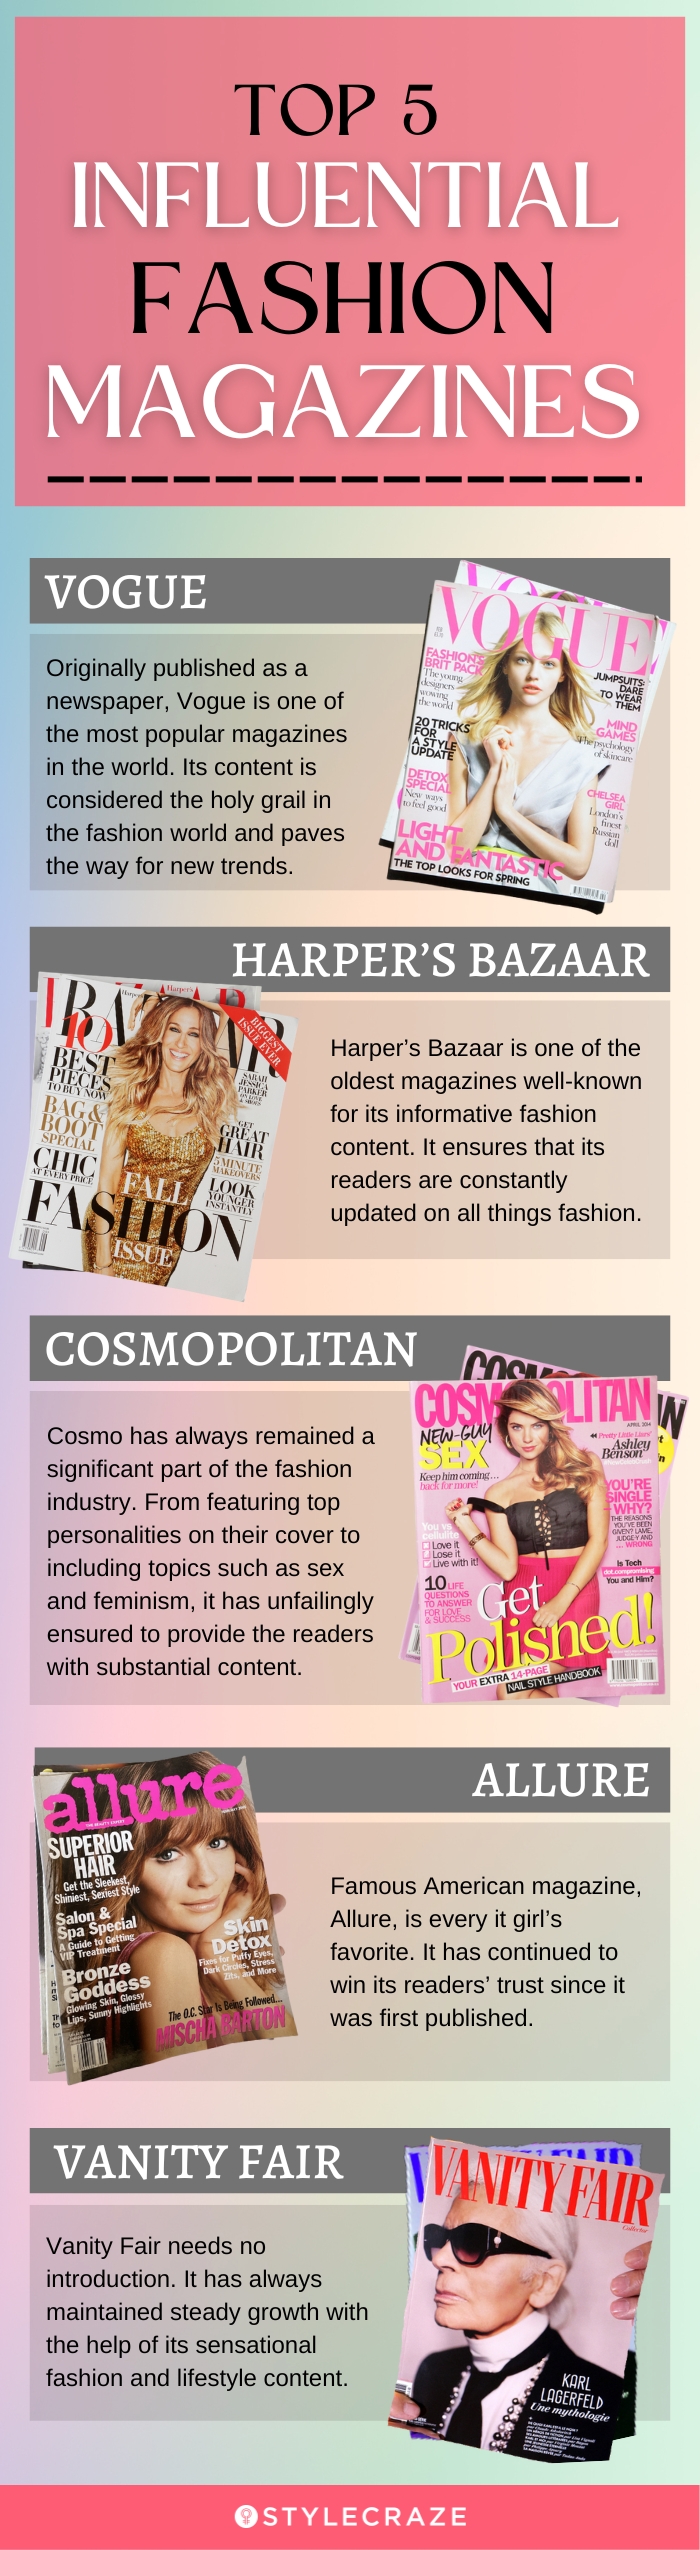 top 5 influential fashion magazines (infographic)